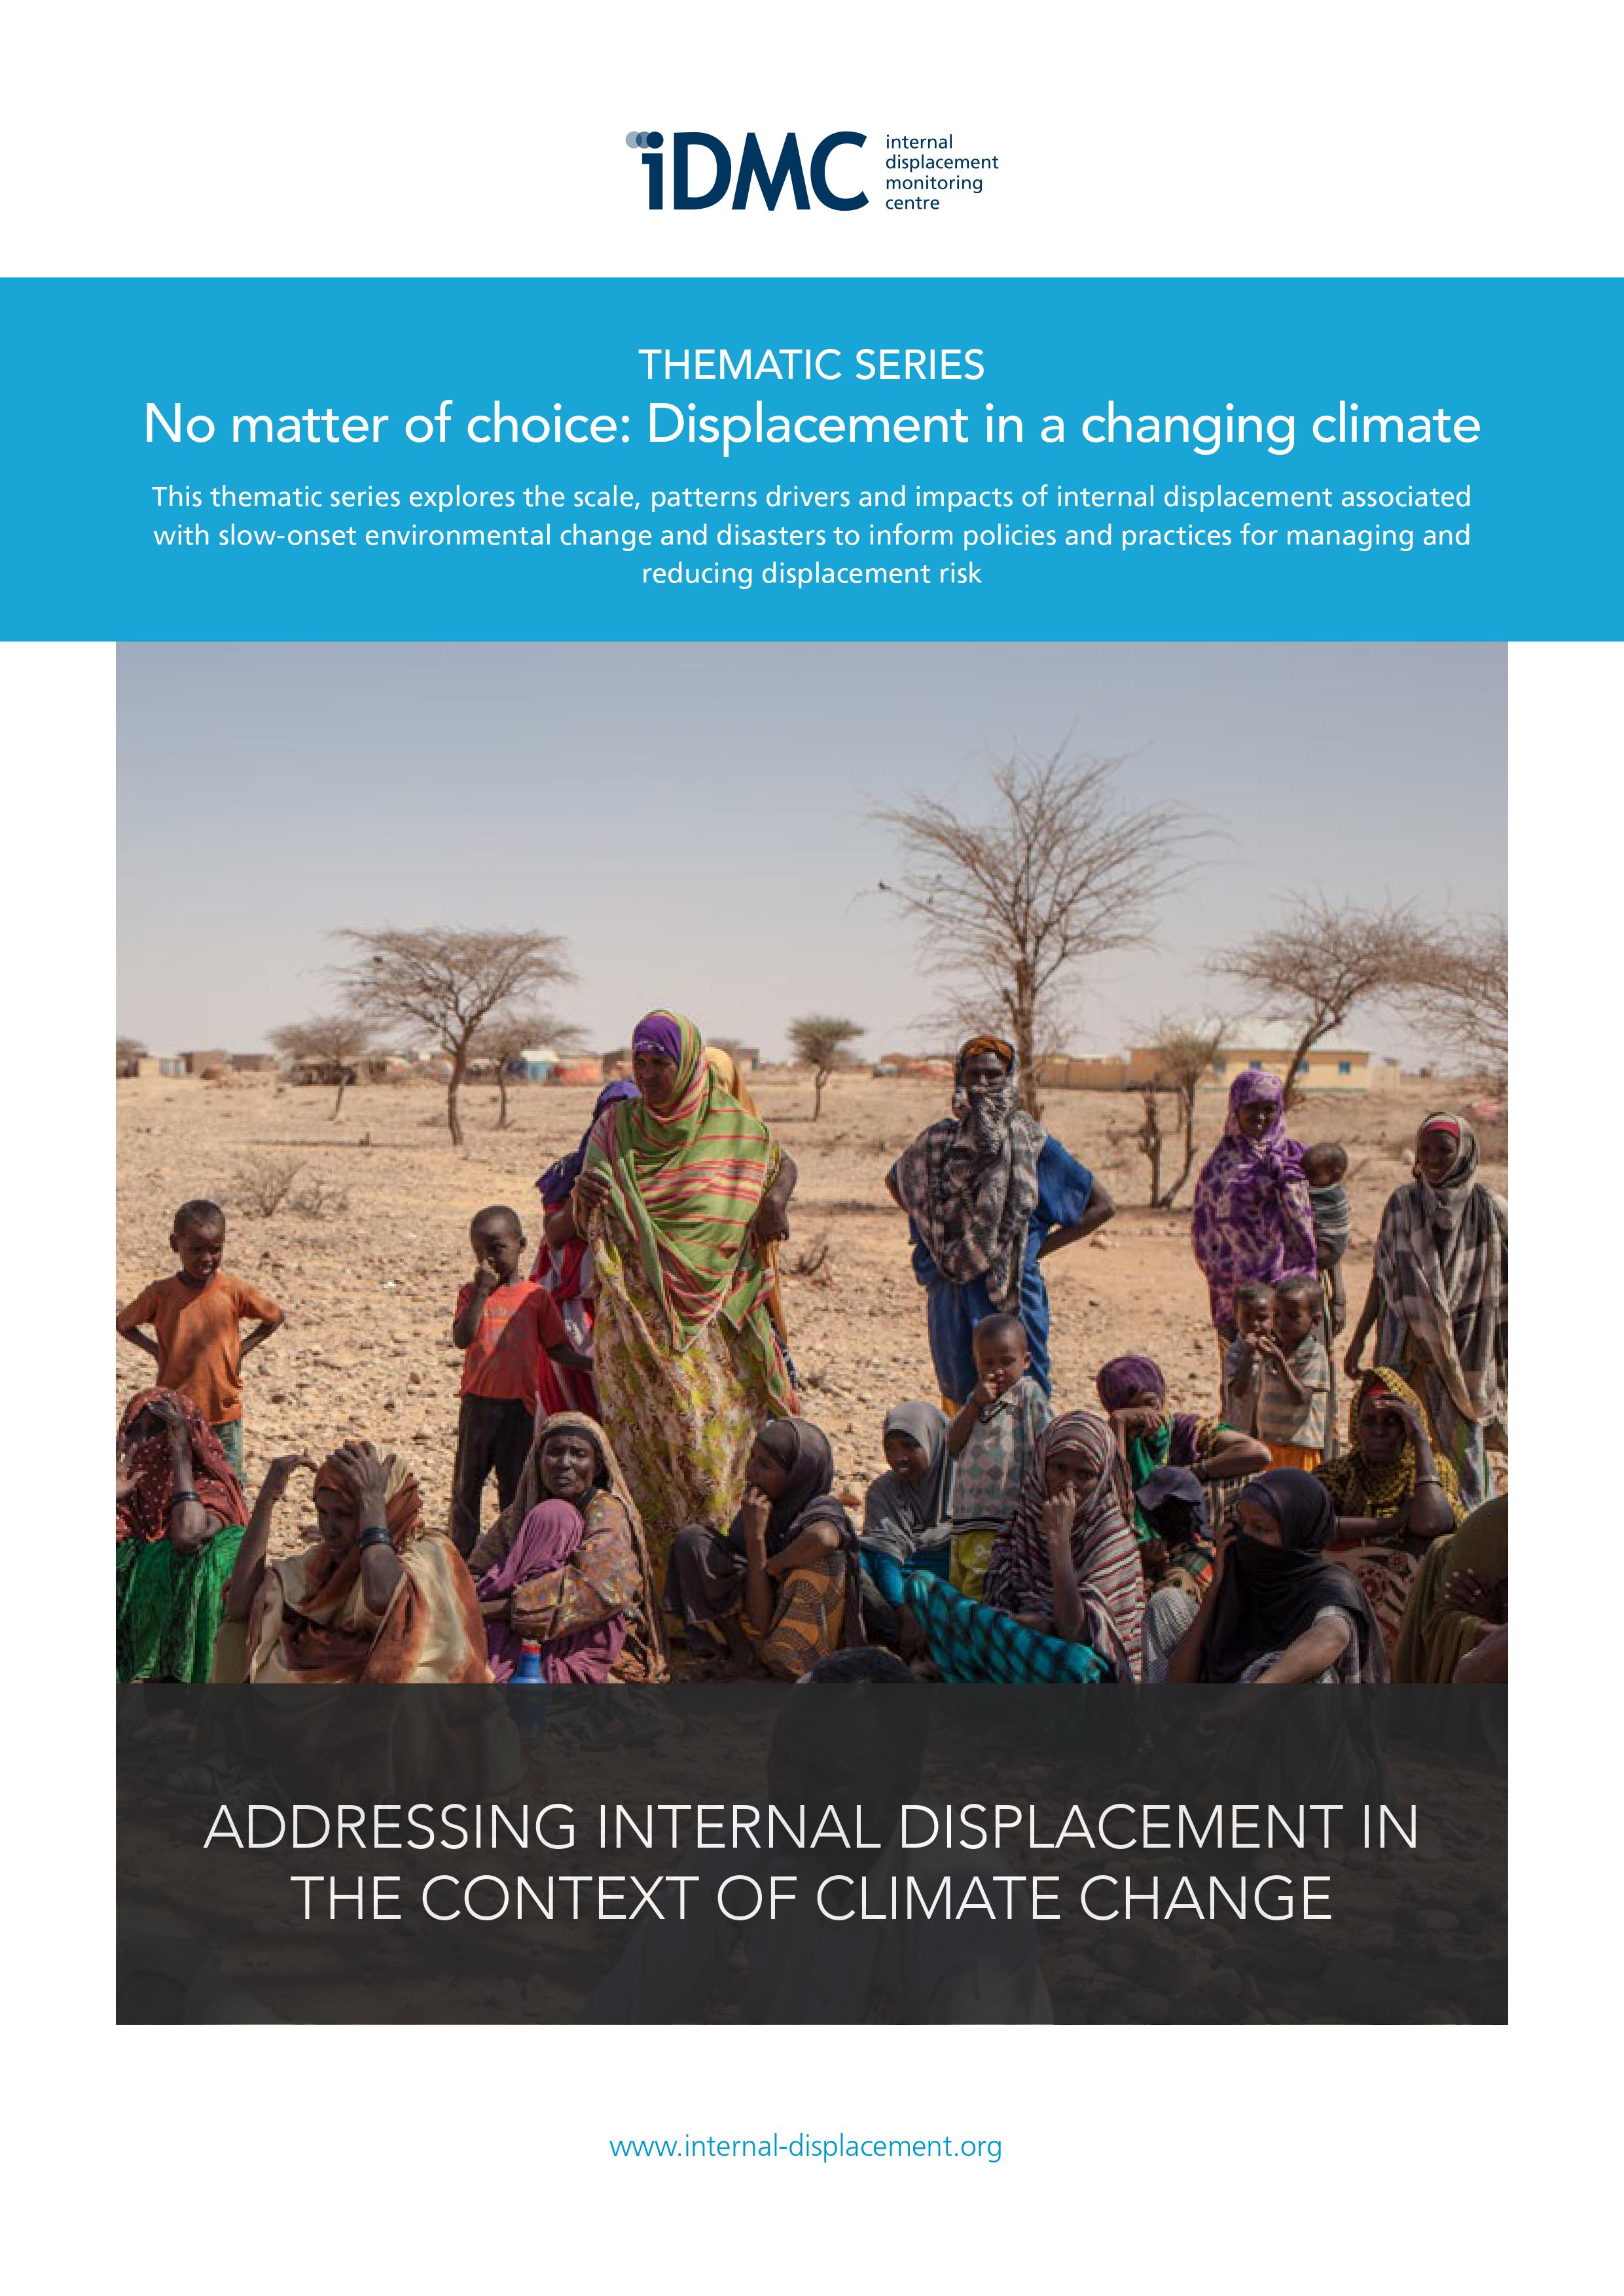 Addressing internal displacement in the context of climate change